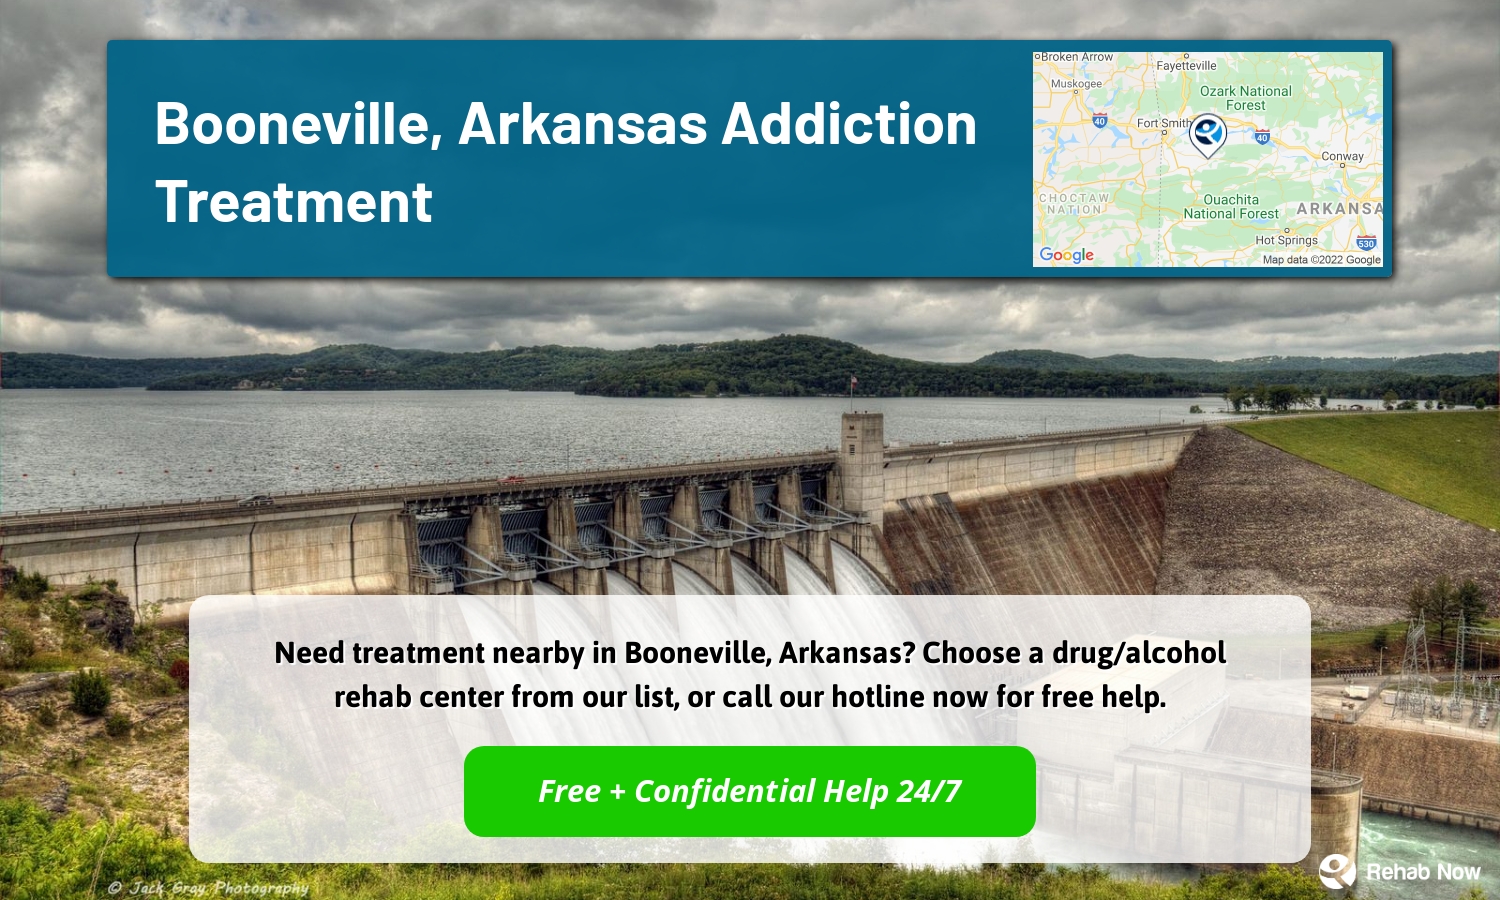 Need treatment nearby in Booneville, Arkansas? Choose a drug/alcohol rehab center from our list, or call our hotline now for free help.